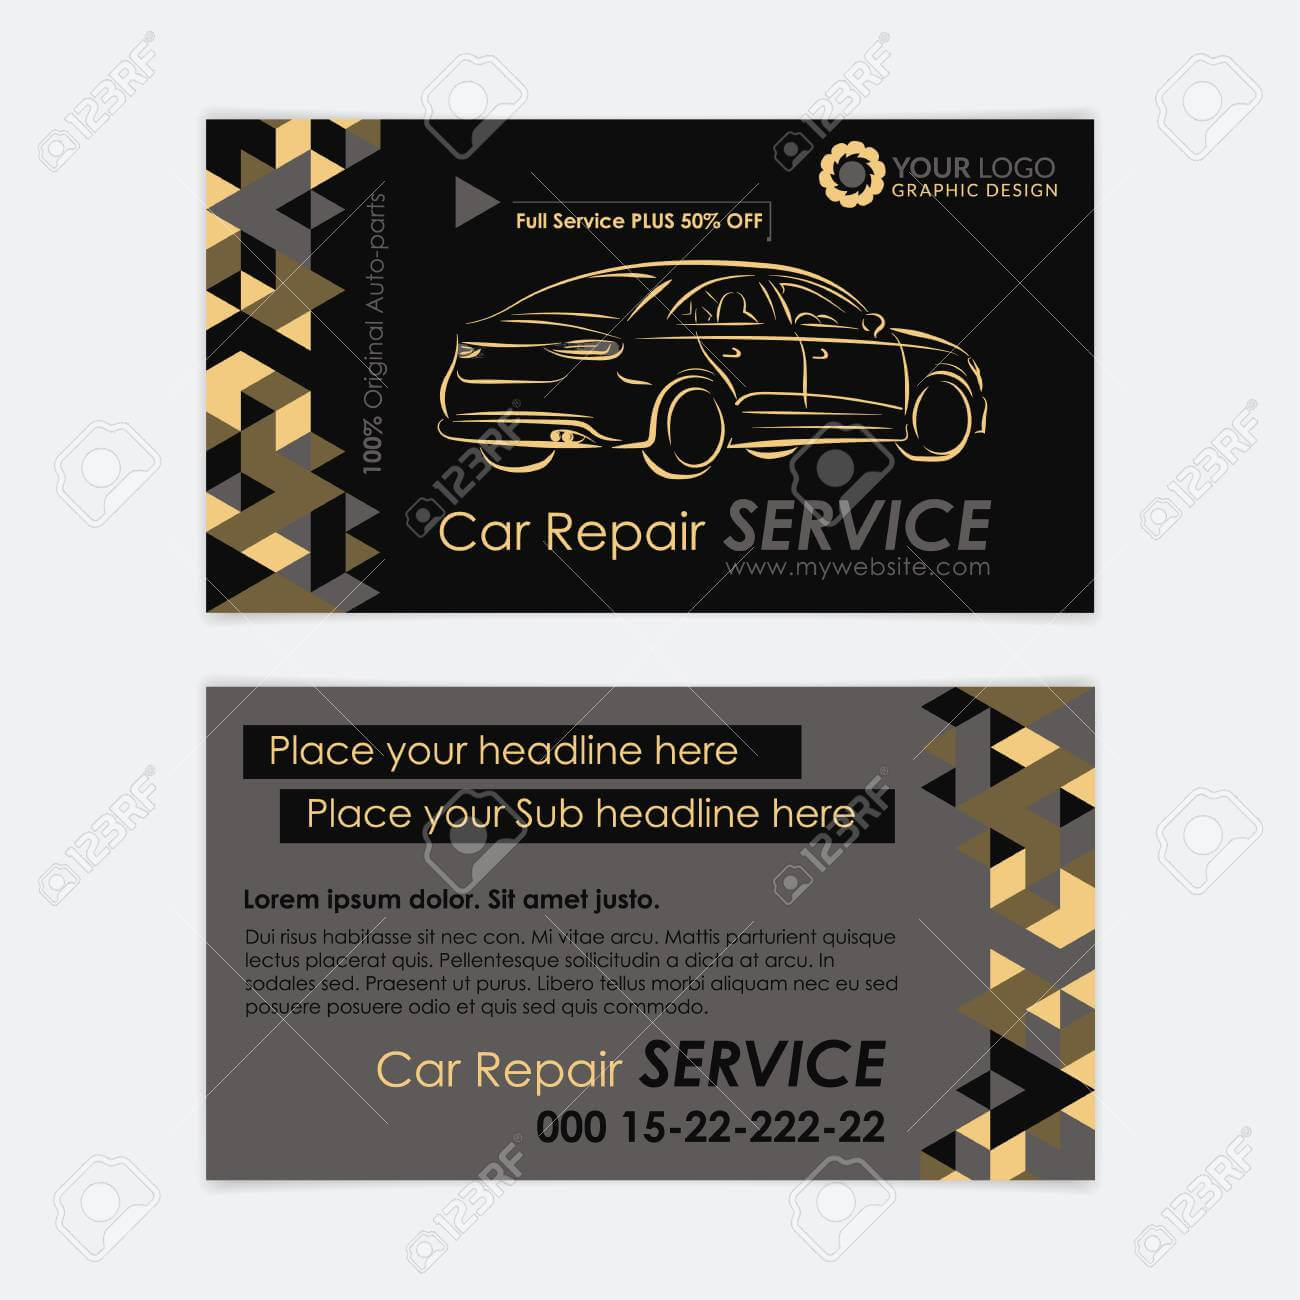 Automotive Service Business Card Template. Car Diagnostics And.. Intended For Automotive Business Card Templates